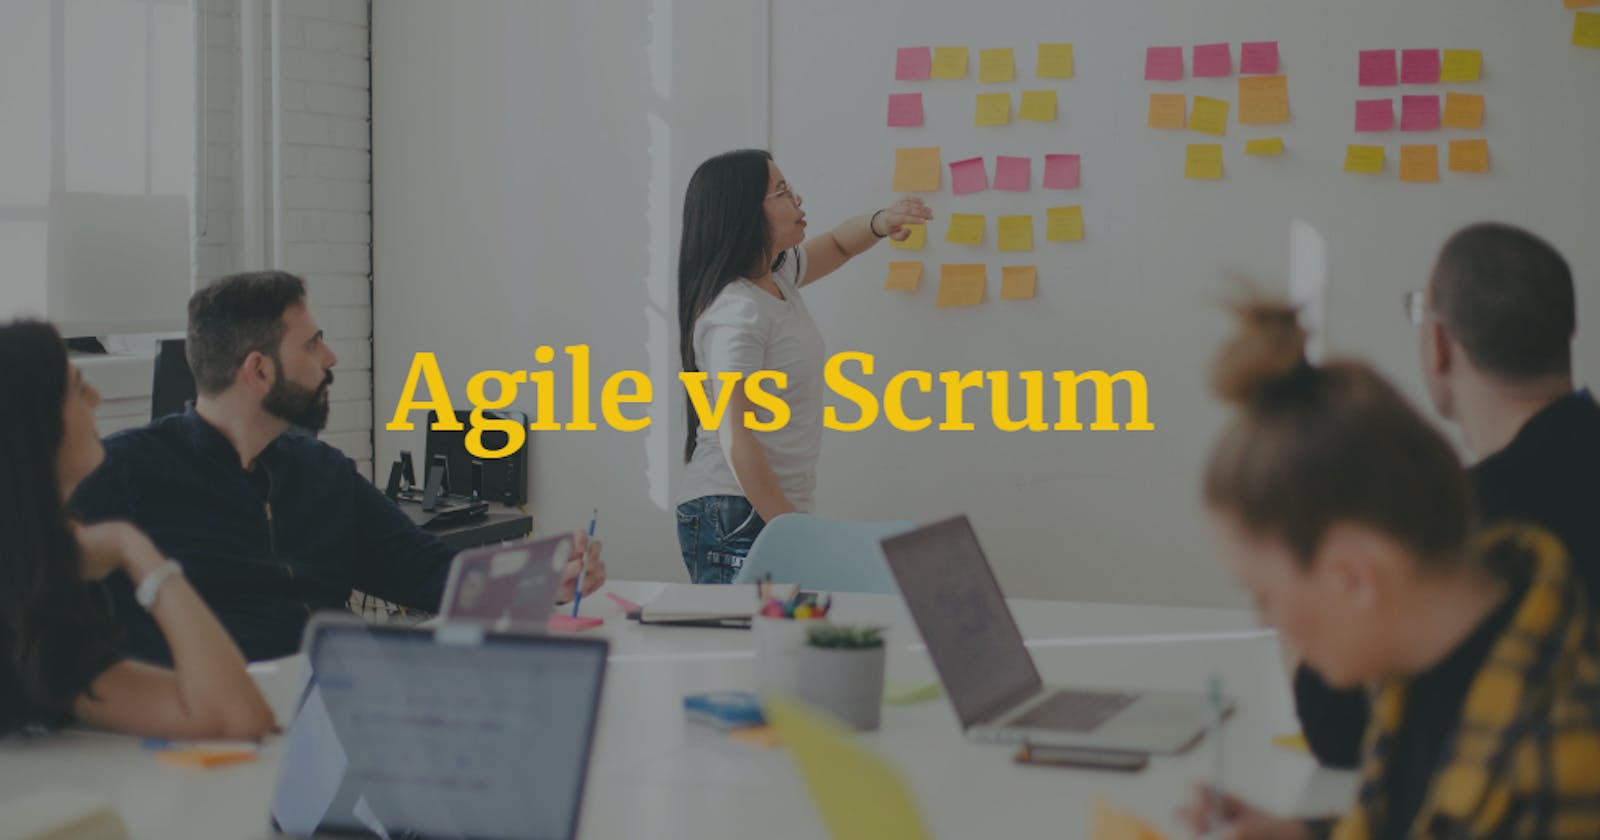 Agile vs Scrum: What’s the difference?